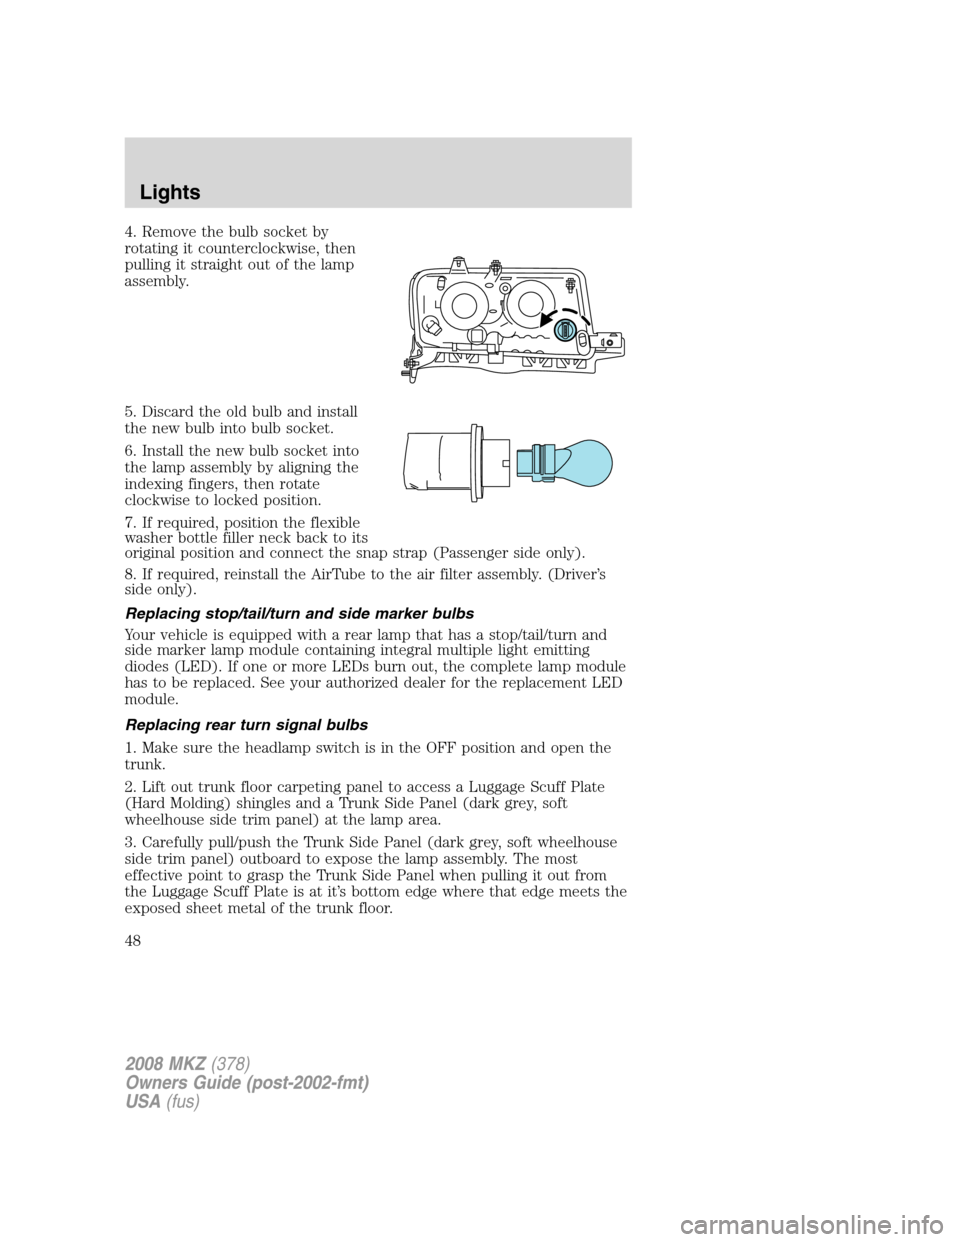 LINCOLN MKZ 2008  Owners Manual 4. Remove the bulb socket by
rotating it counterclockwise, then
pulling it straight out of the lamp
assembly.
5. Discard the old bulb and install
the new bulb into bulb socket.
6. Install the new bulb